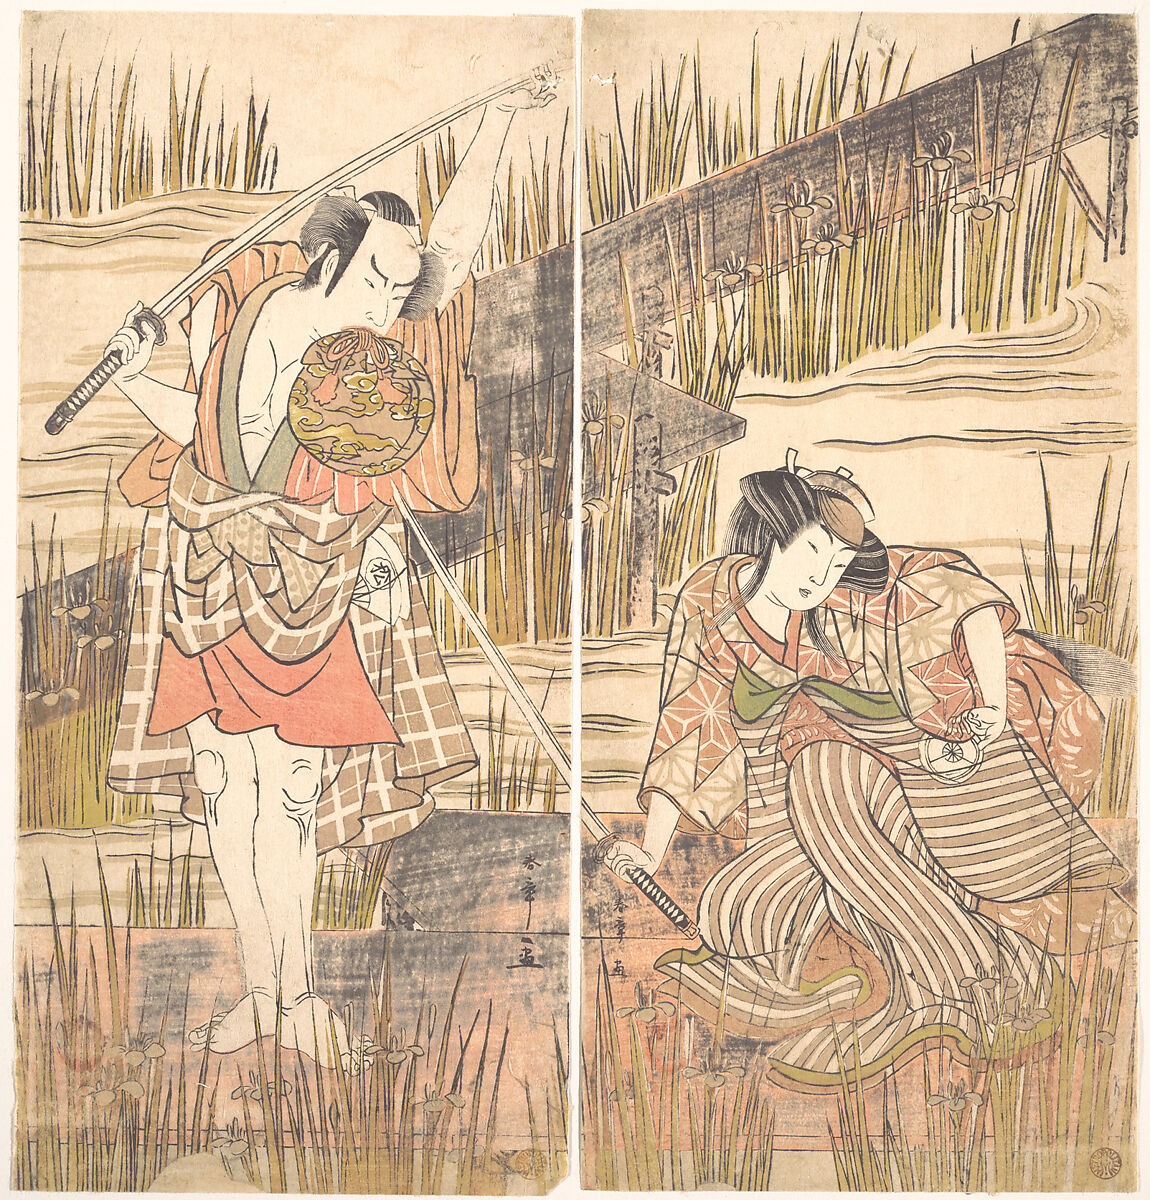 The Actor Onoye Matsusuke with Sword Held Above His Head with Both Hands, Katsukawa Shunshō　勝川春章 (Japanese, 1726–1792), Diptych of woodblock prints (nishiki-e); ink and color on paper, Japan 